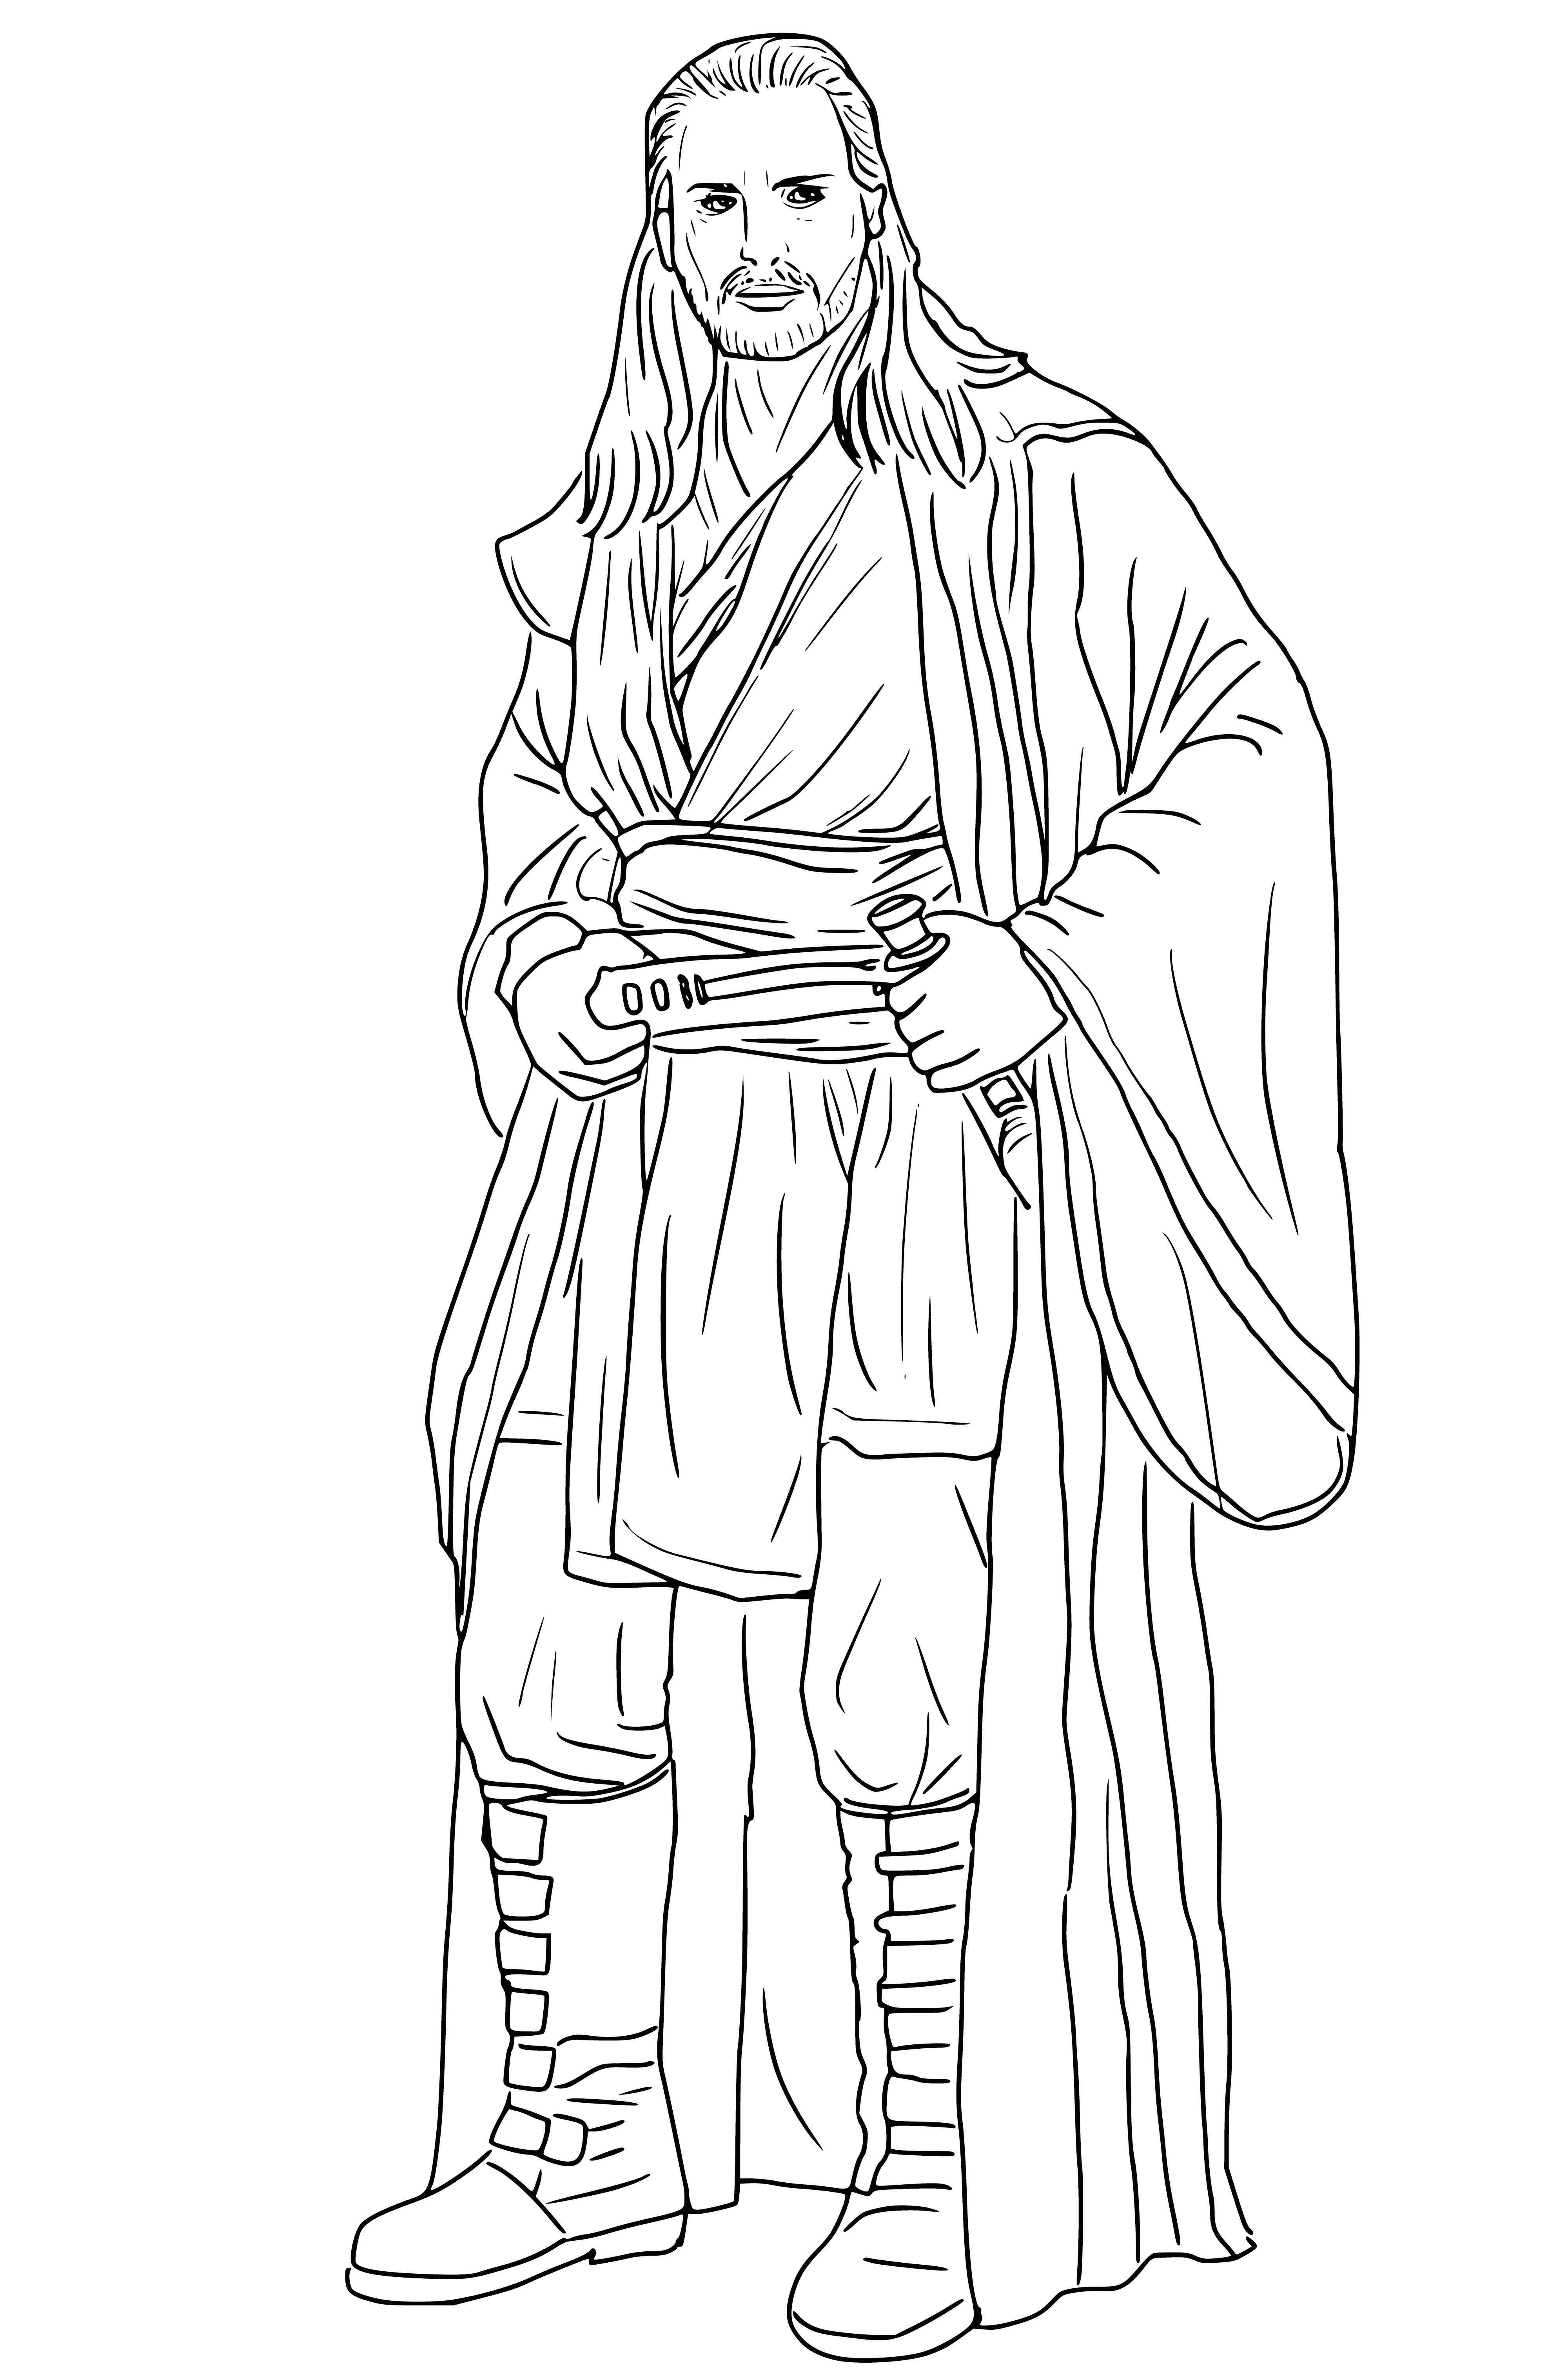 coloring page: Man with brown hair, beard & brown cloak holding blue lightsaber with planet & 2 moons in background.